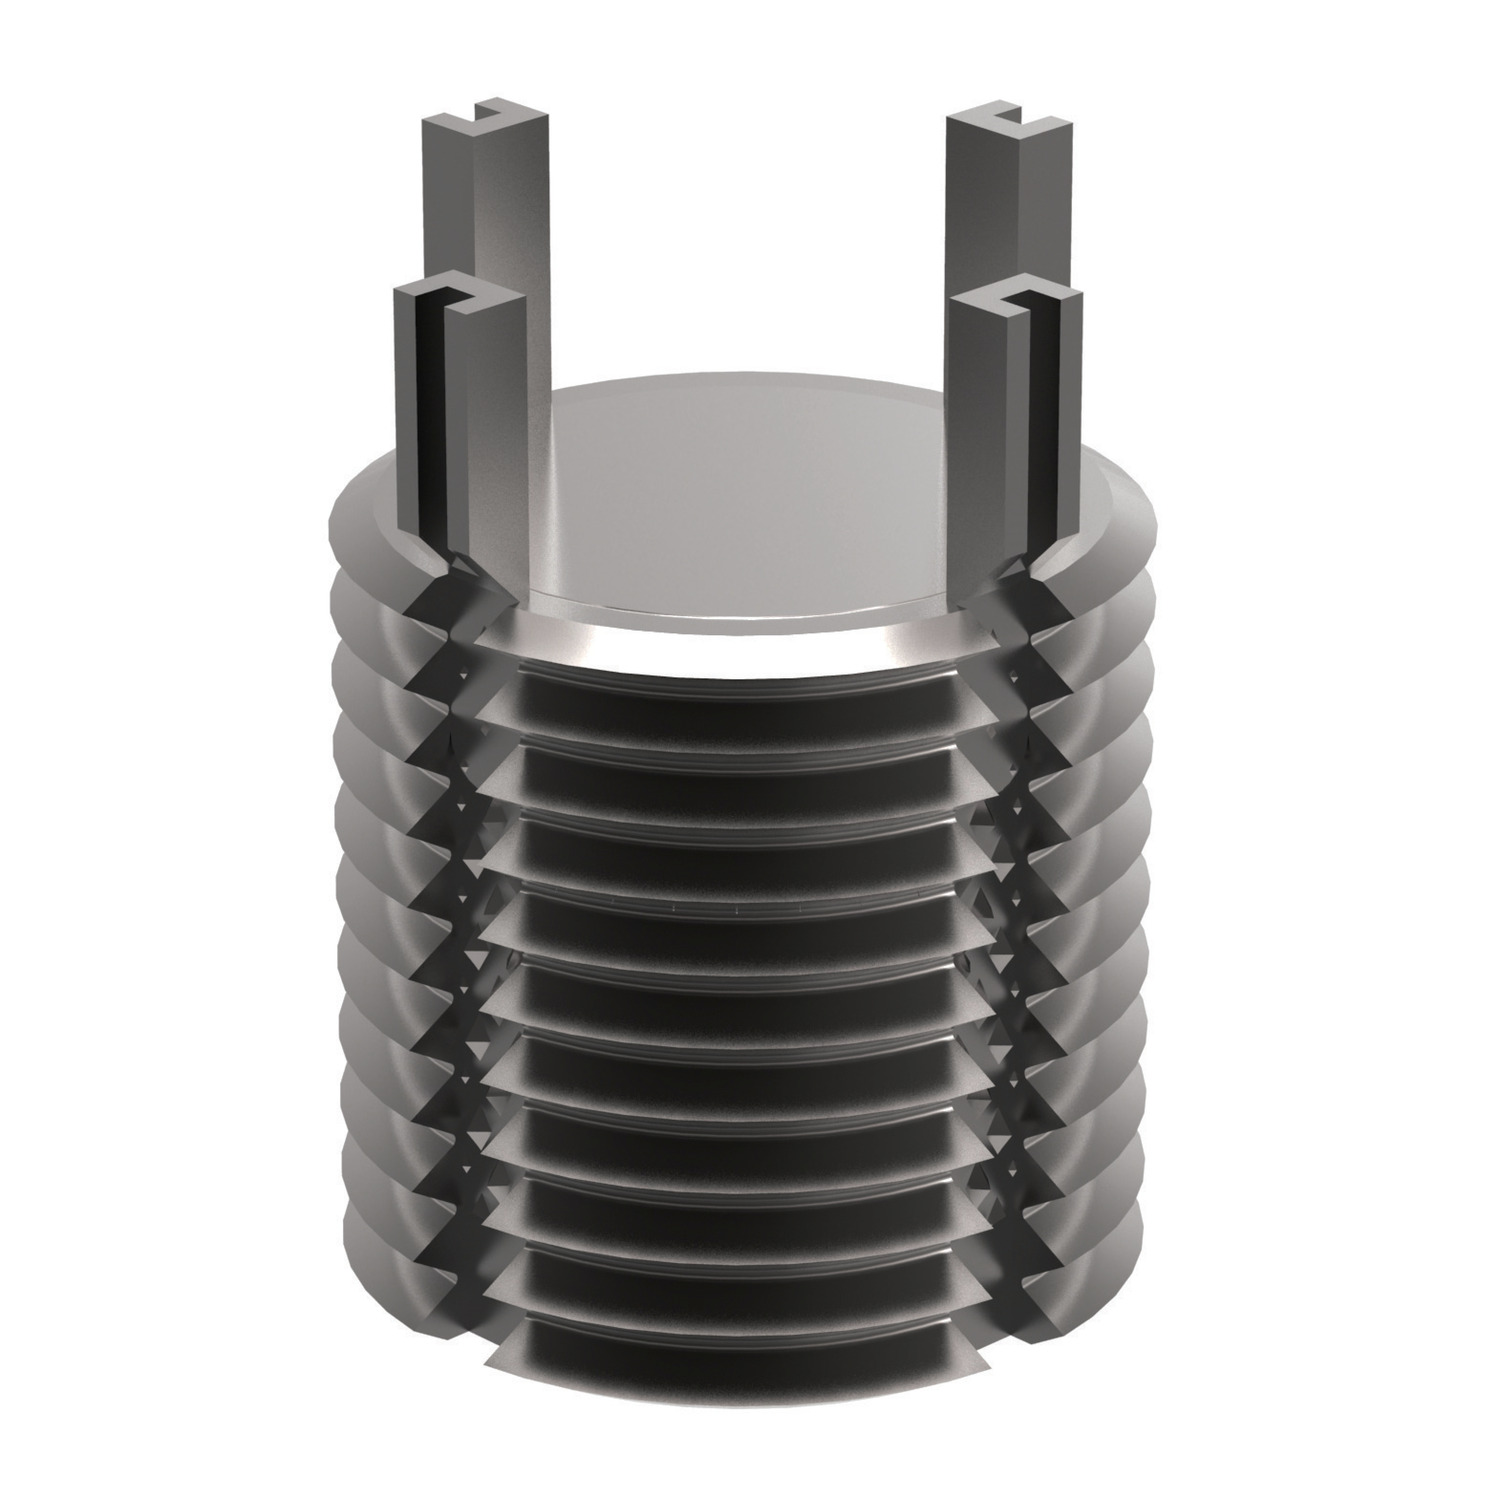 Threaded Insert - Solid - Metric For the plugging of threads and other unused holes, solid inserts provide a quick and easy to install solution. Metric, carbon steel.